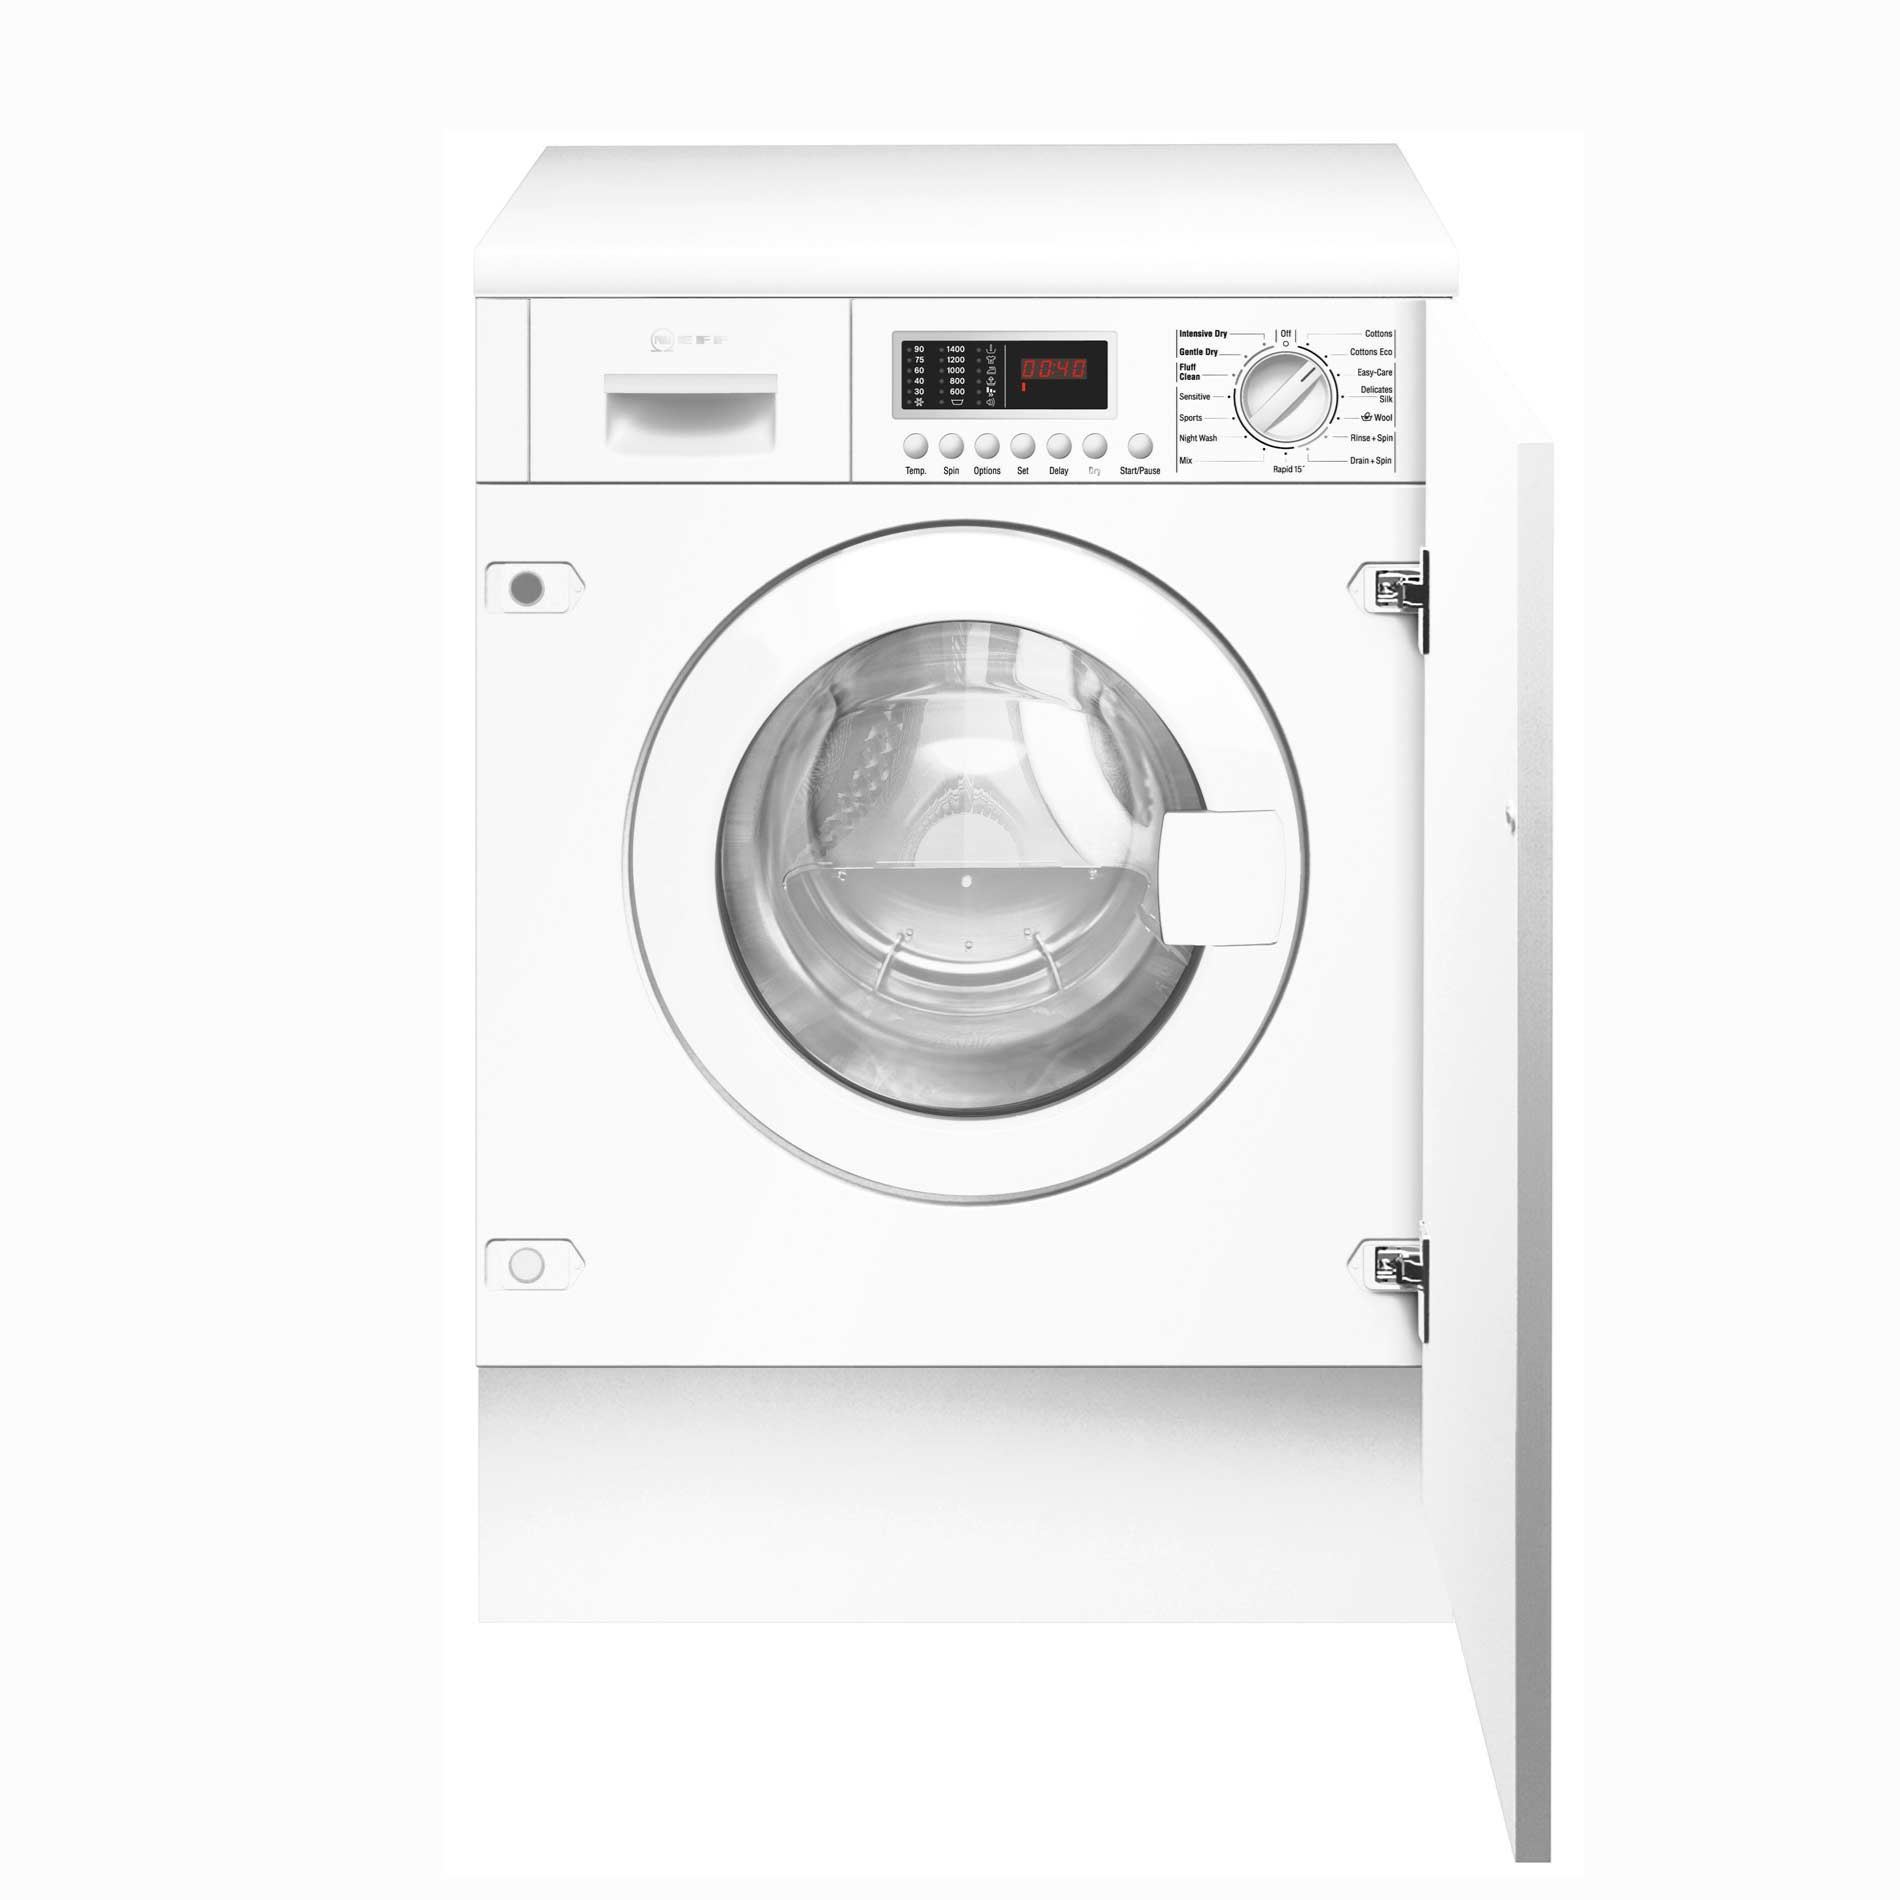 Picture of Neff V6540X2GB Fully Integrated Automatic Washer Dryer